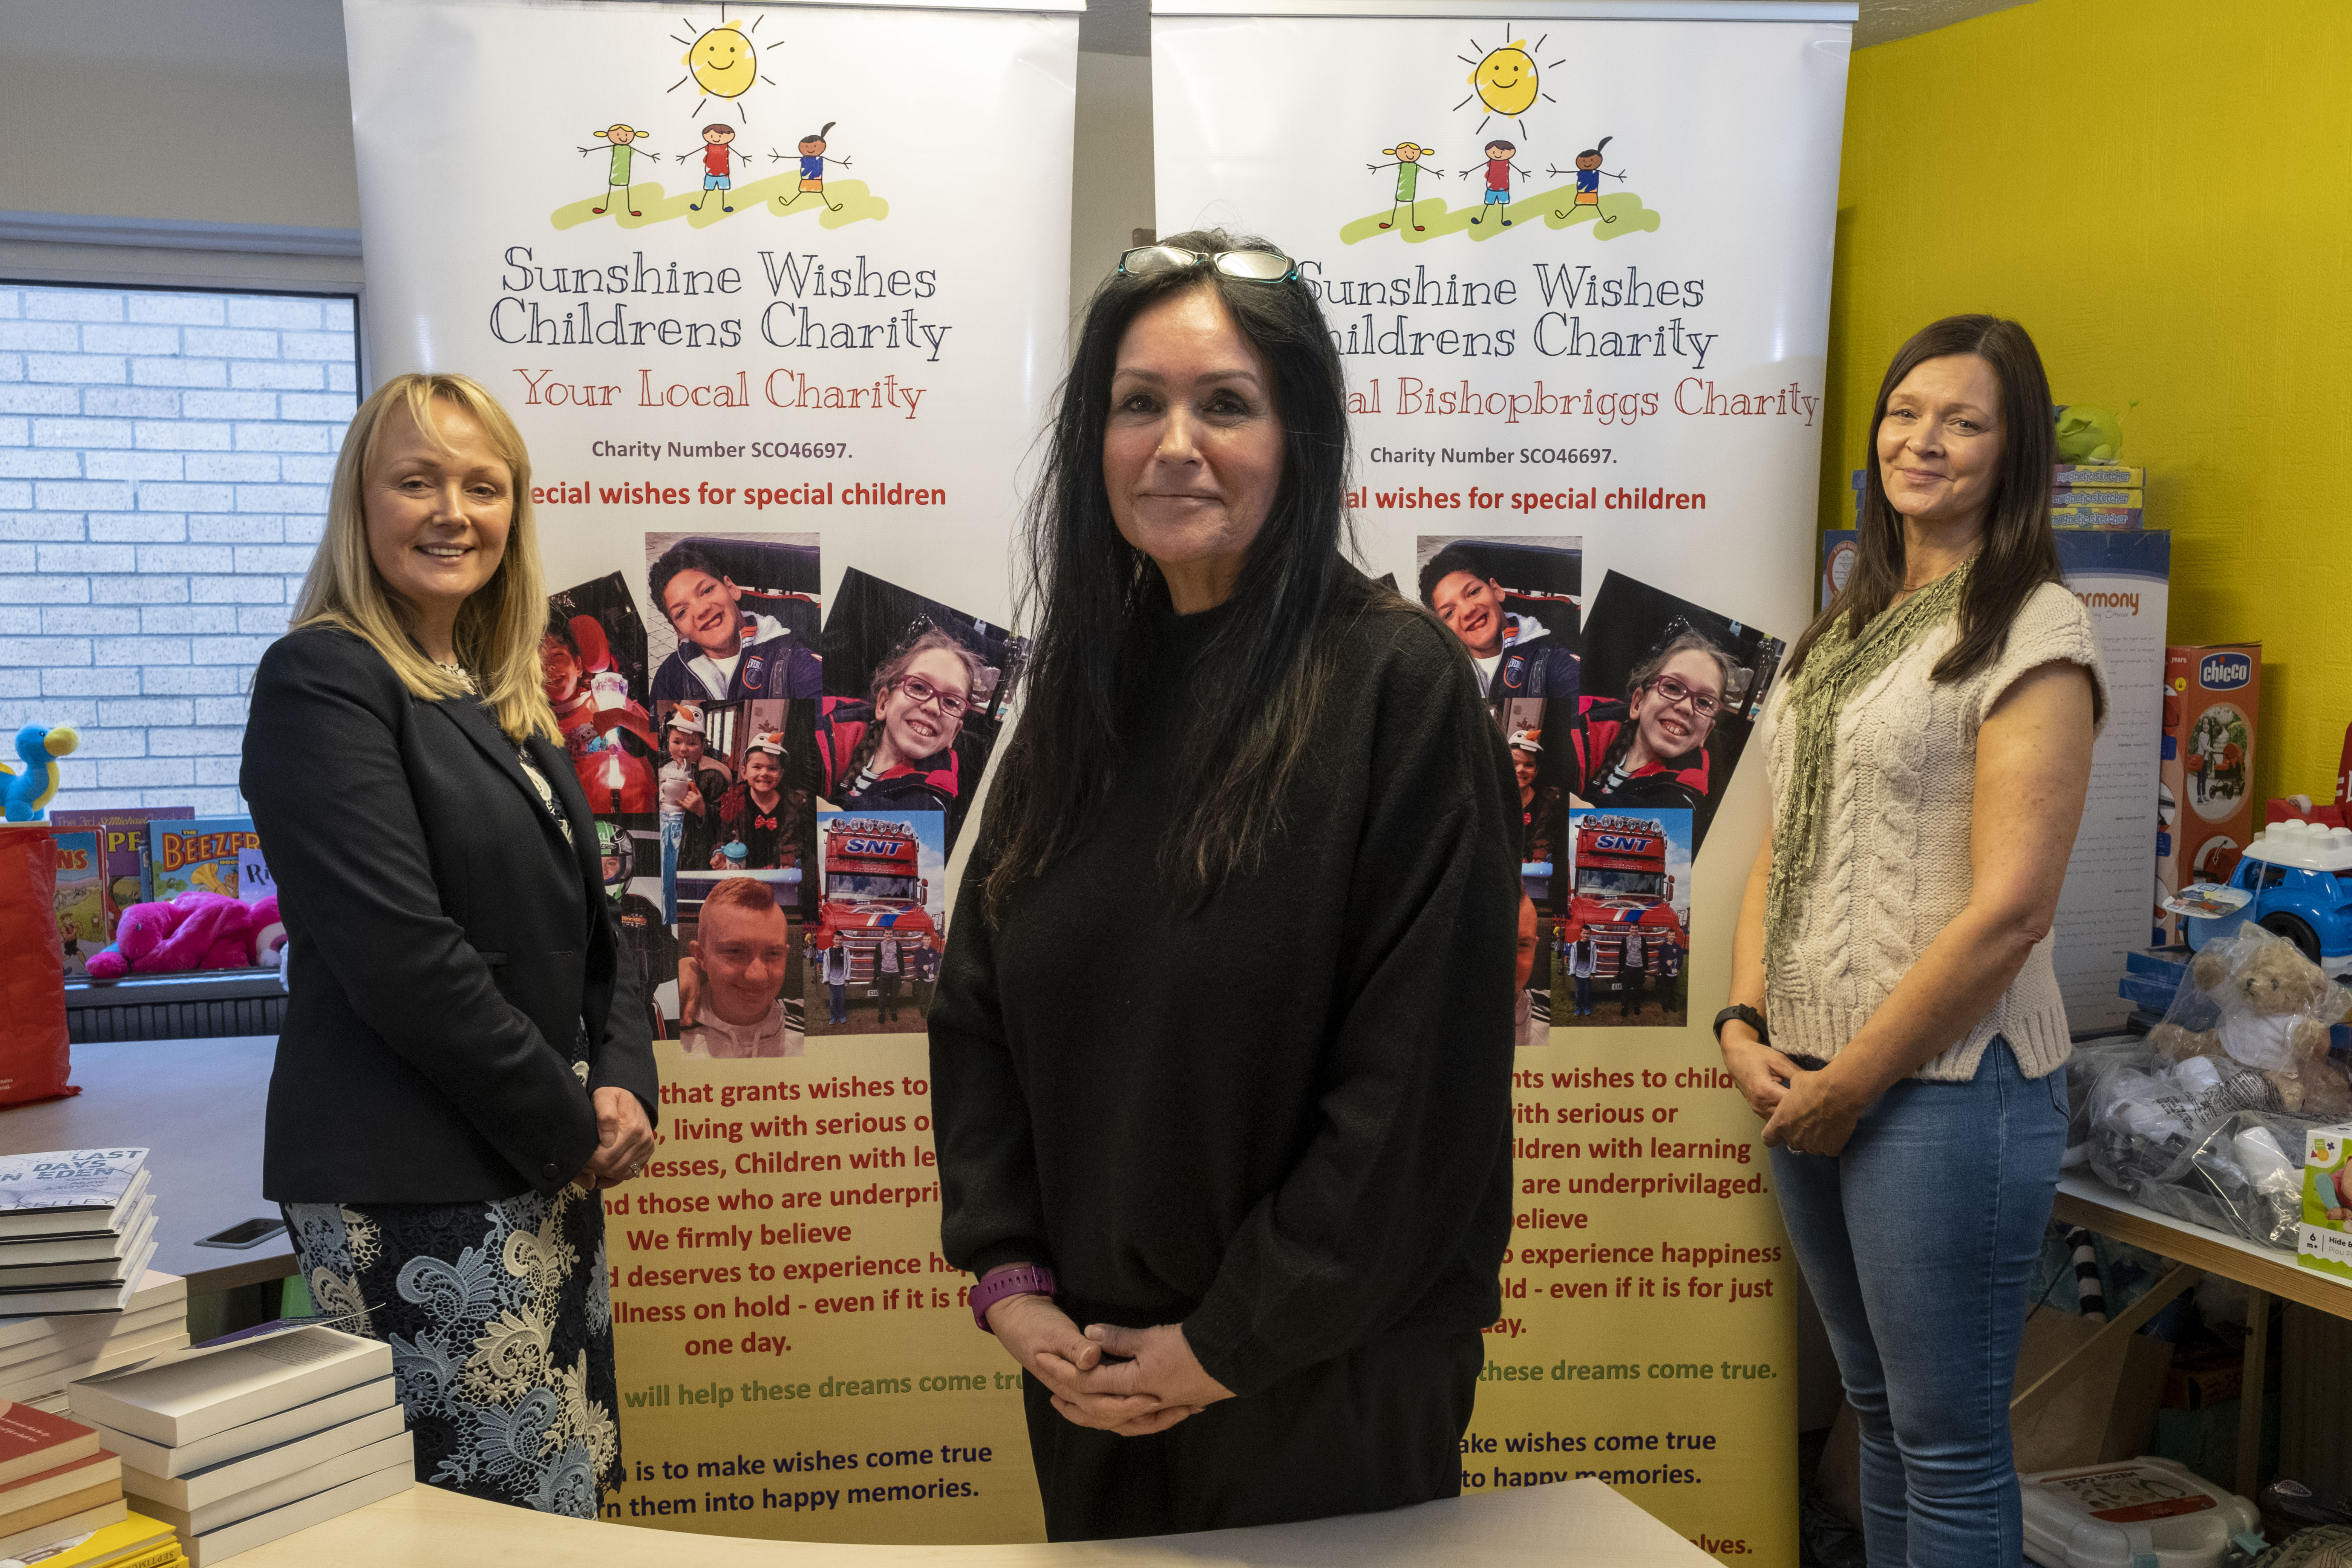 Bishopbriggs charity to help local families thanks to Cala funding boost